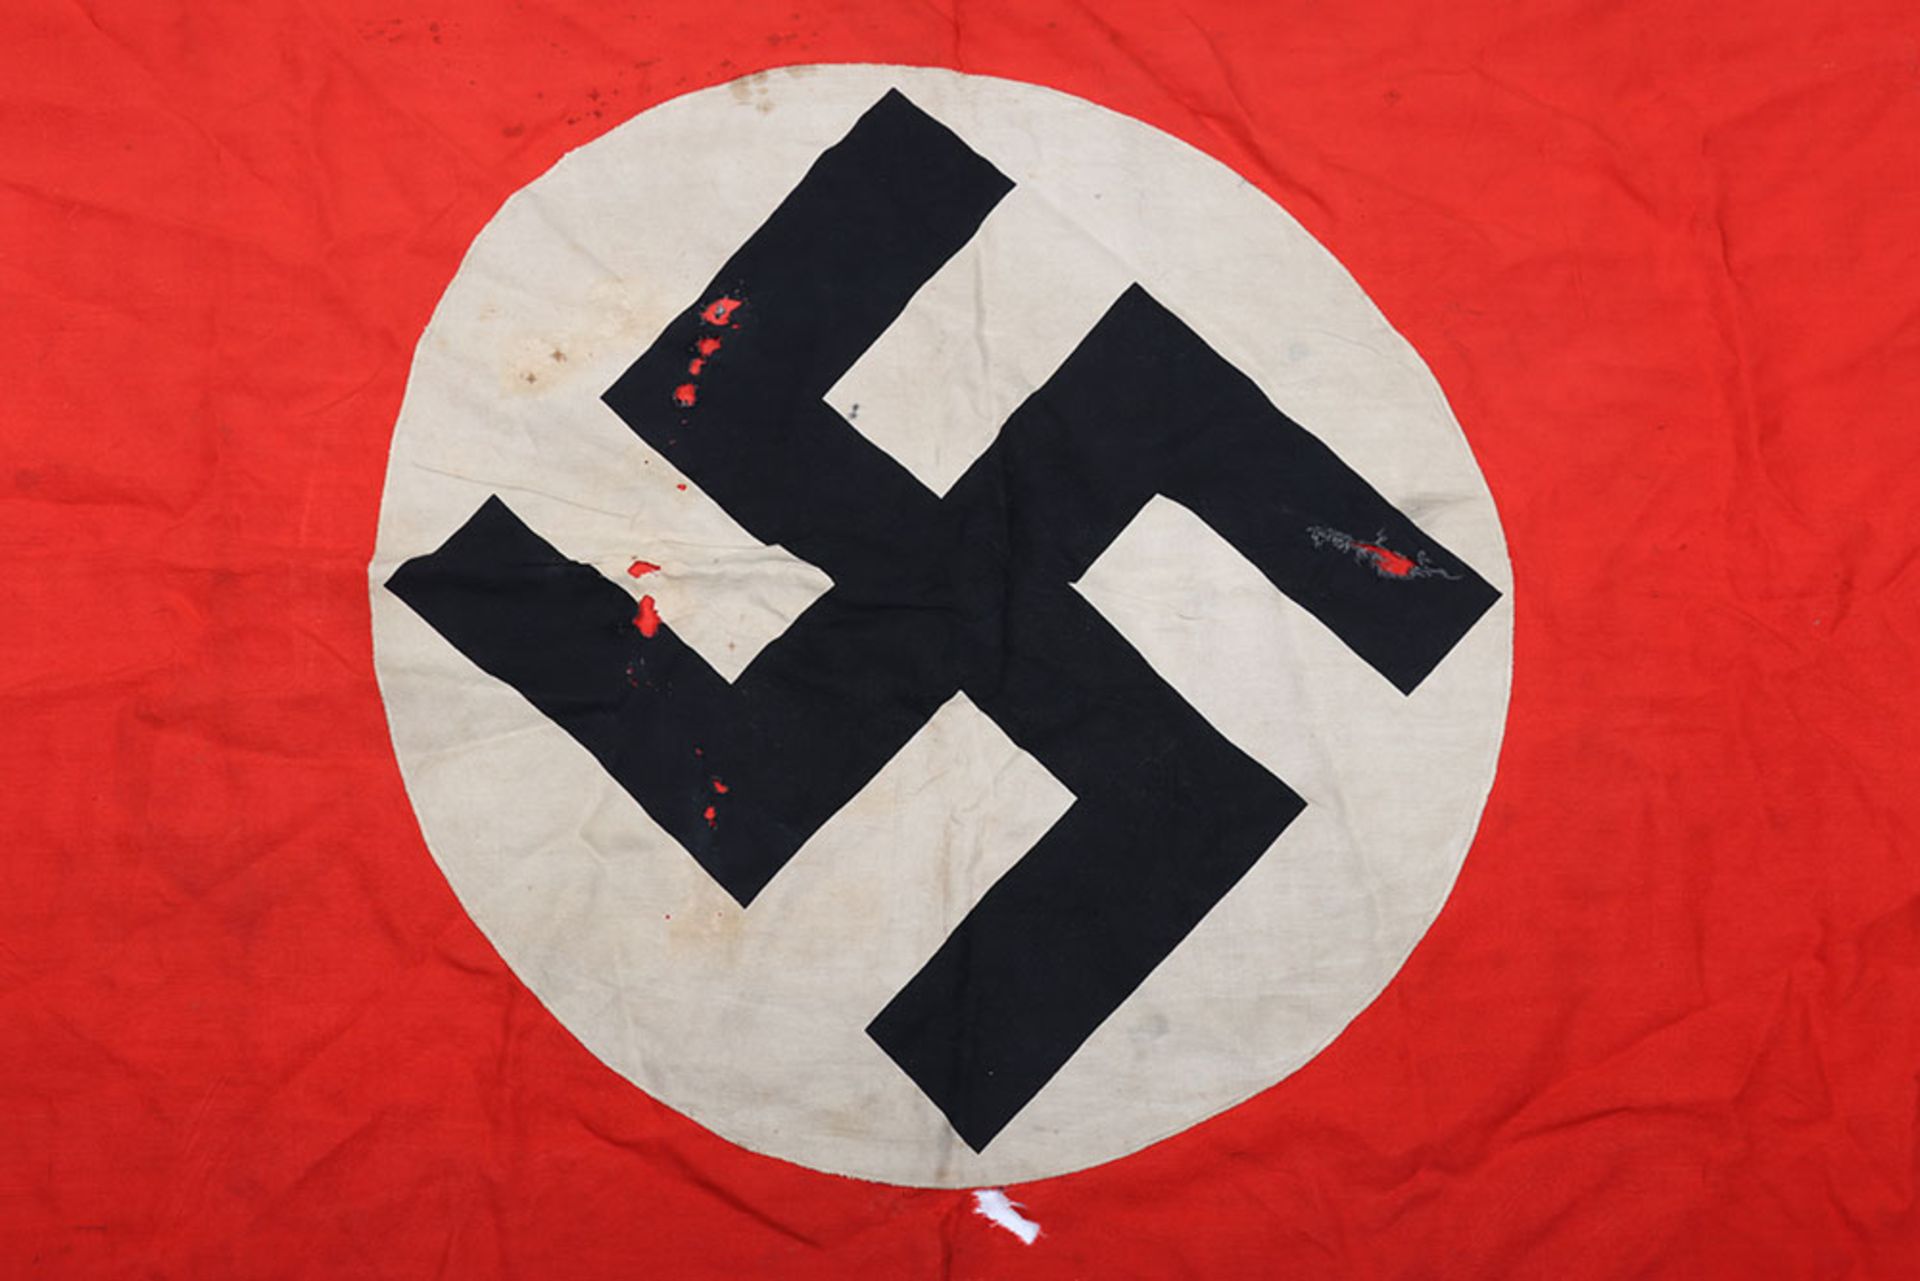 WW2 German Flag Reputed to Have Been Captured on Omaha Beach D-Day 6th June 1944 - Image 3 of 9